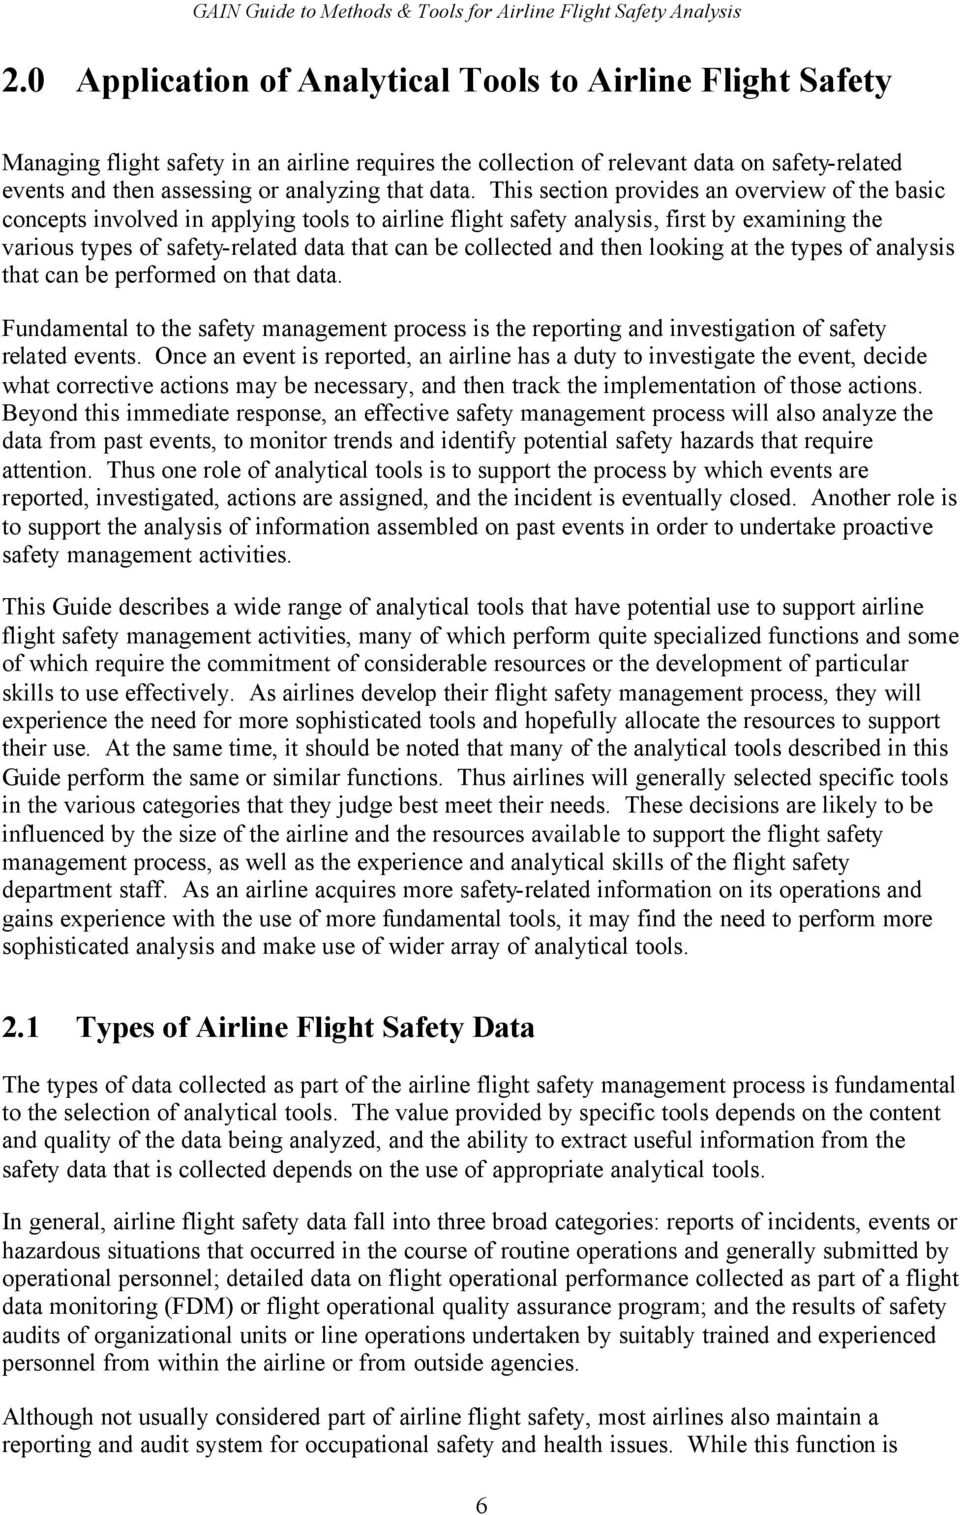 This section provides an overview of the basic concepts involved in applying tools to airline flight safety analysis, first by examining the various types of safety-related data that can be collected